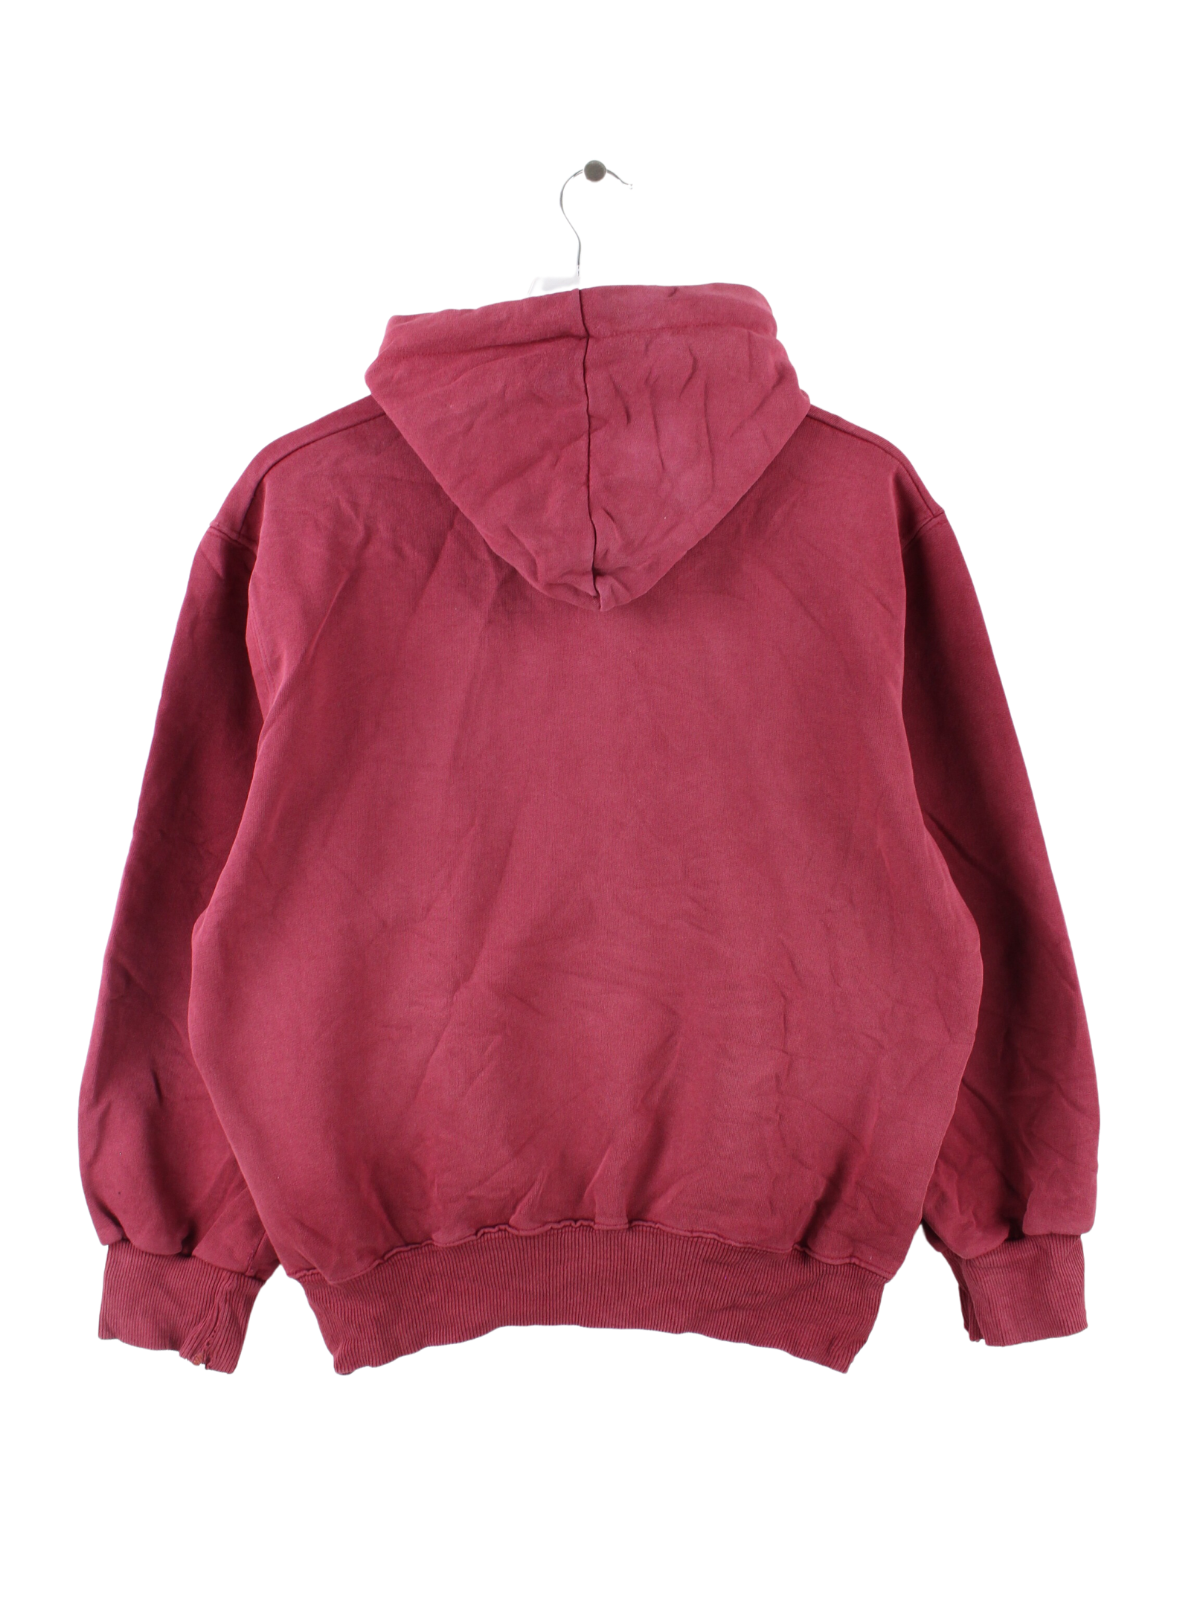 GAP Embroidered Hoodie Red S